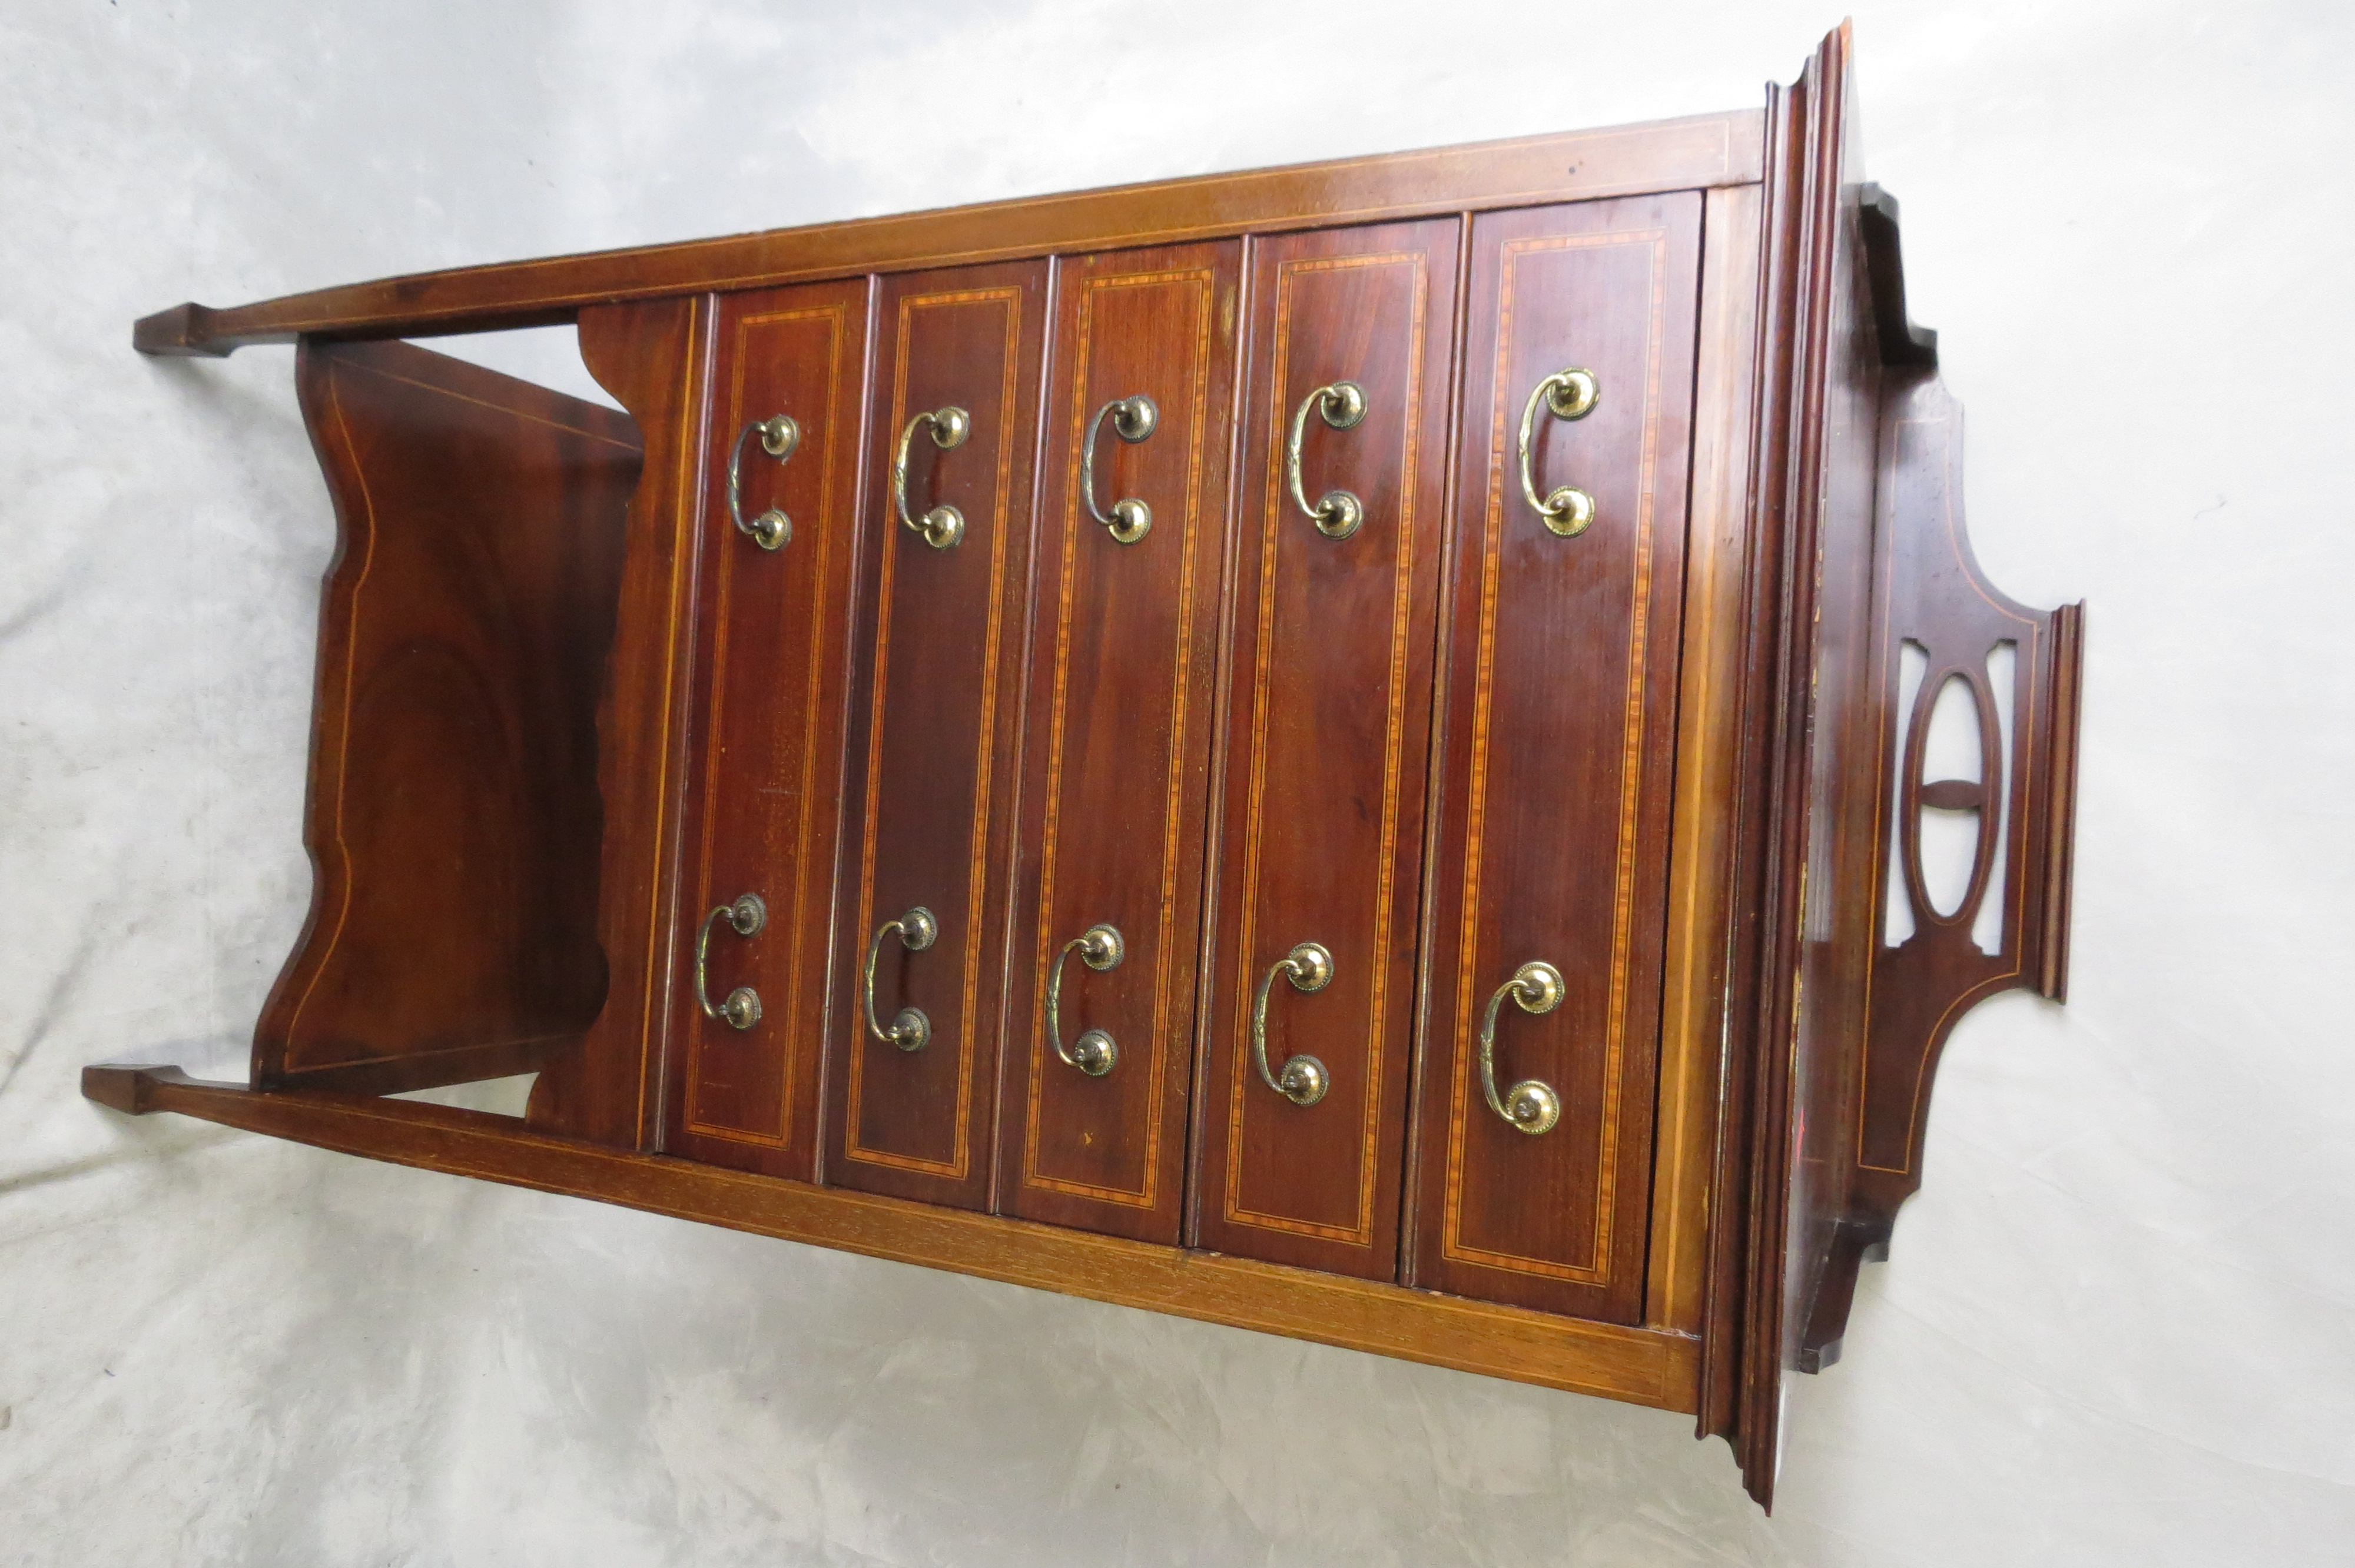 Edwardian inlaid mahogany Sheraton revival music cabinet, 3/4 extended back, five drawers, square